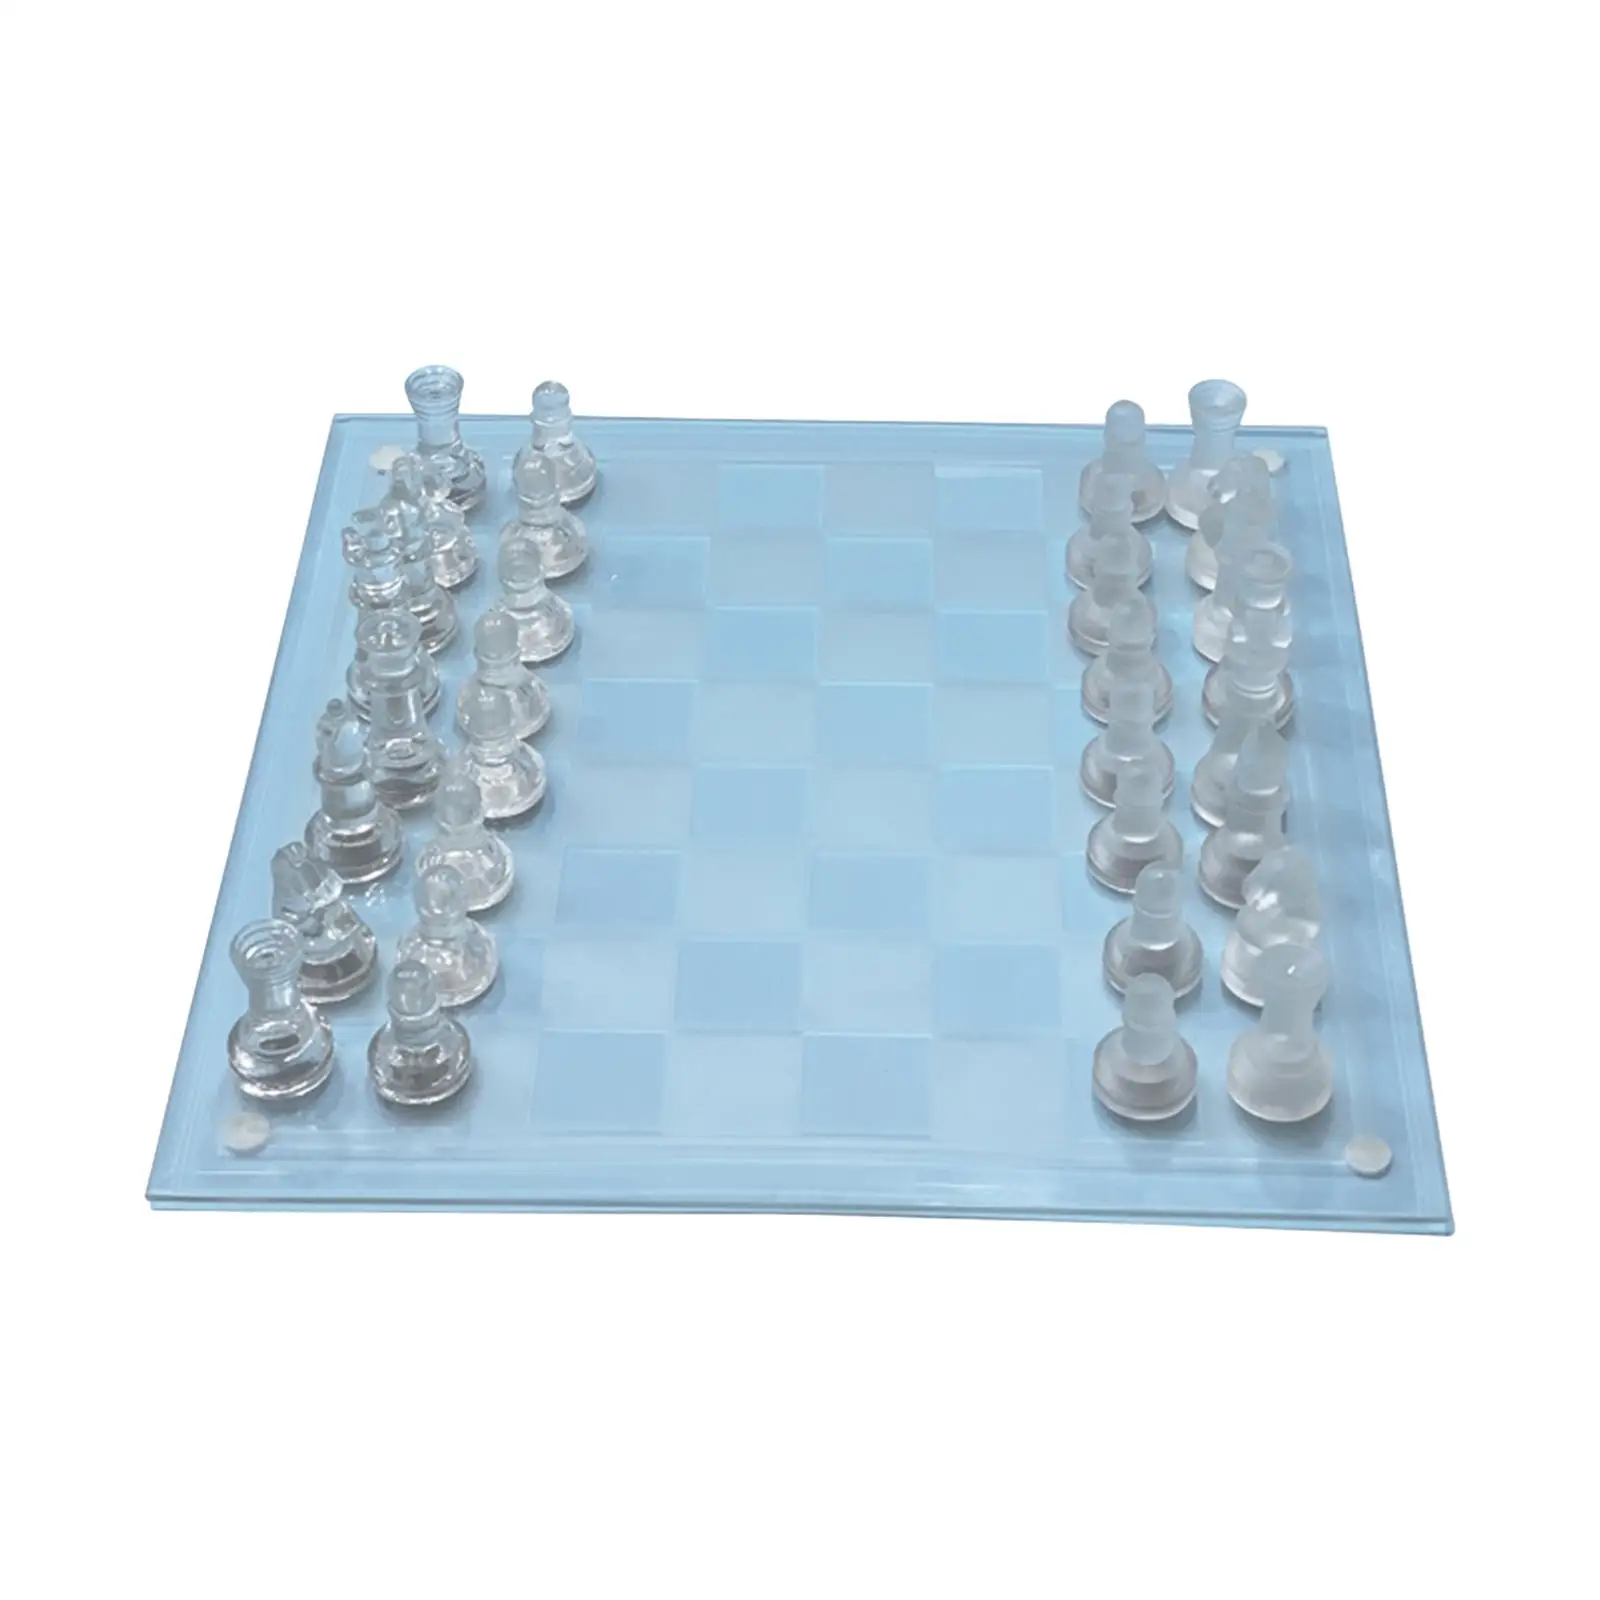 Crystal Chess Board Adults Play Set Elegant 13.78`x13.78`` Classic Strategy Game for Game Interaction Trips Party Picnics